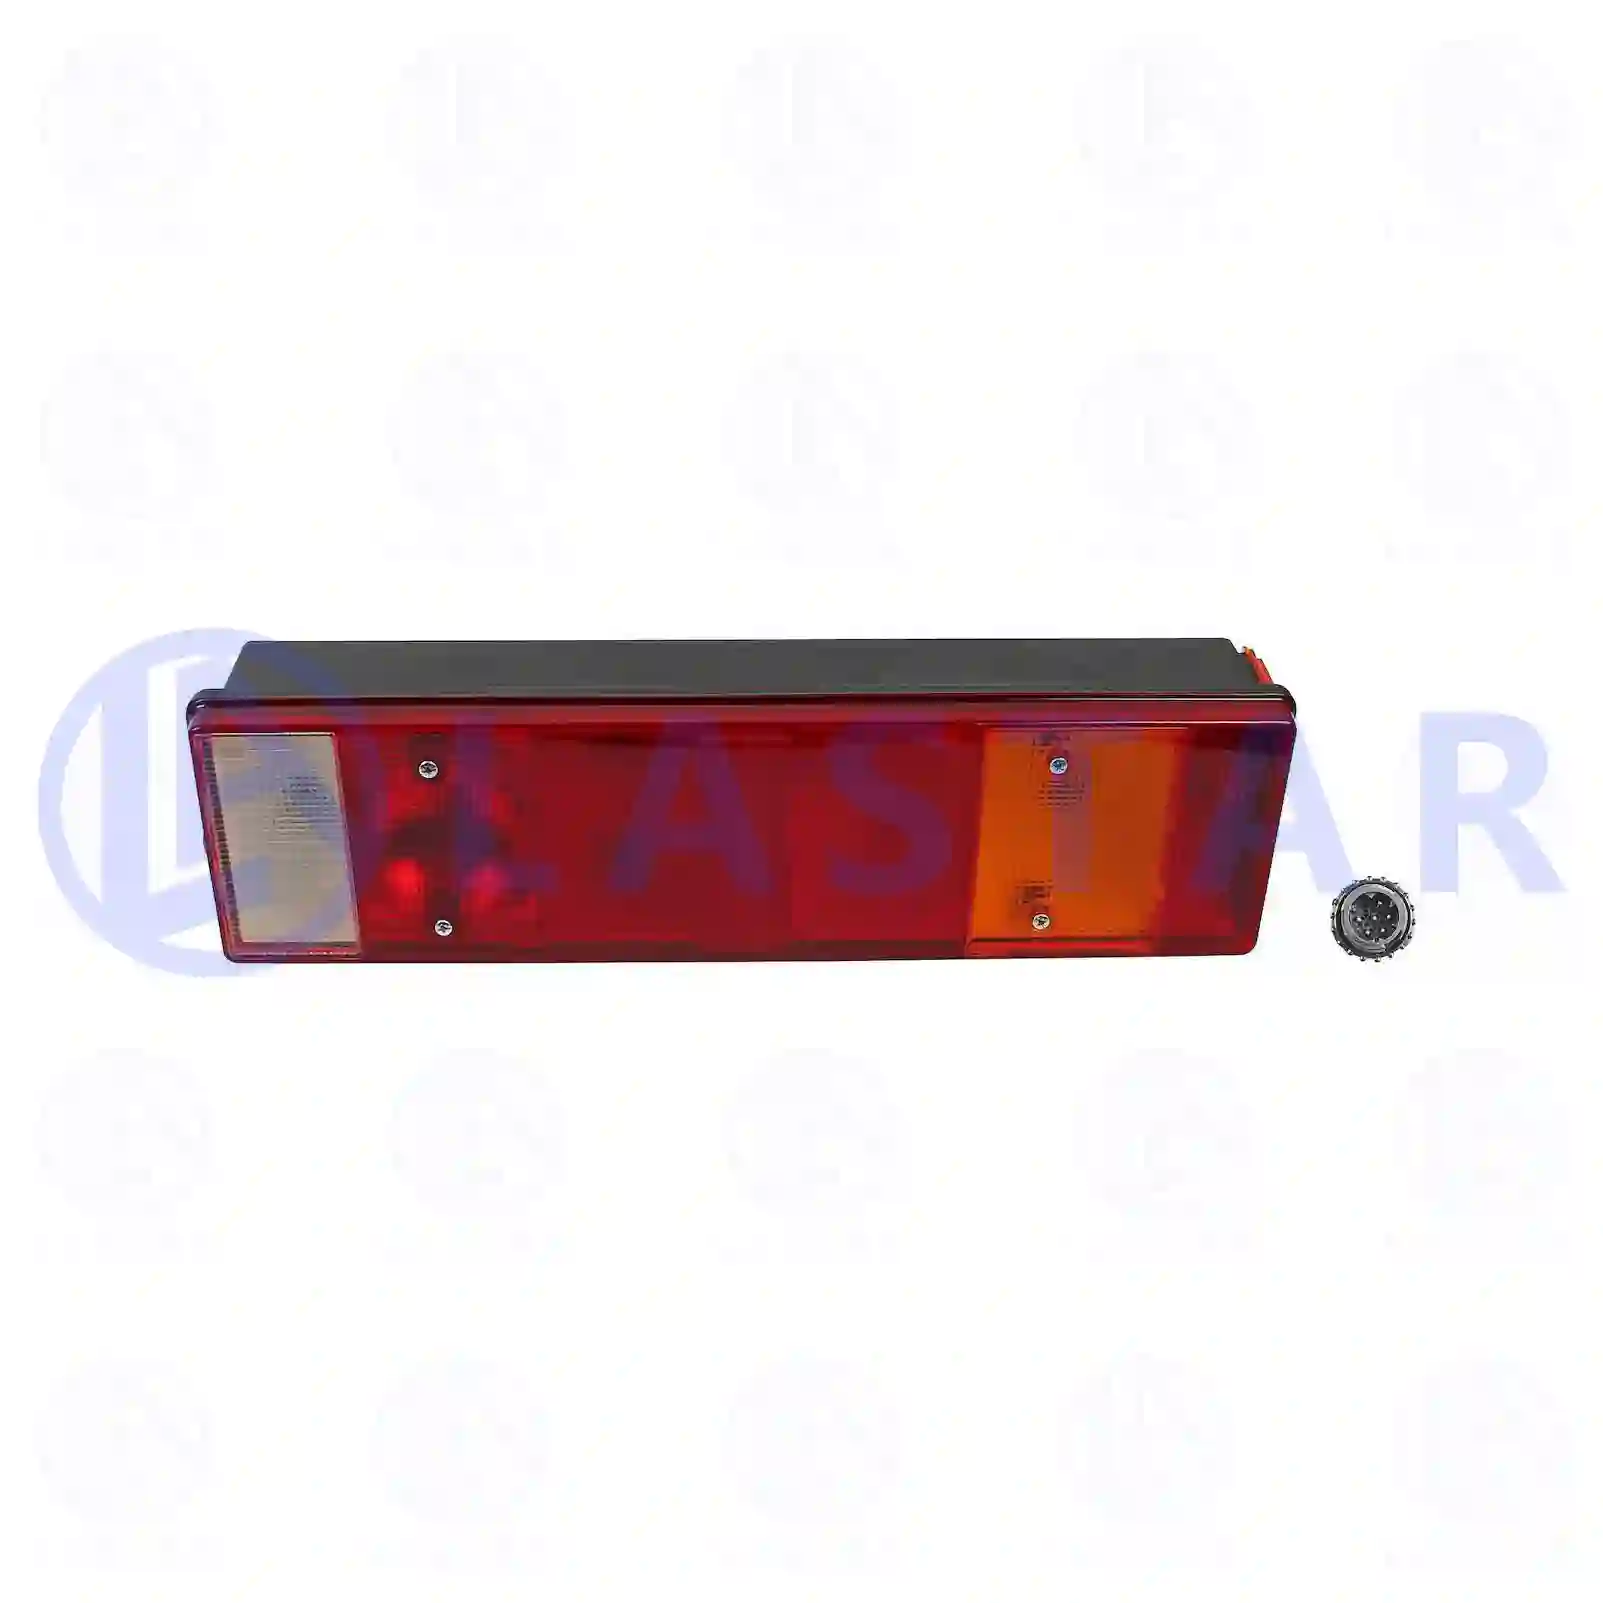 Tail lamp, right, 77710378, 1213955, 1357076, 1524493, 1625986, 81252256523, 5001847585, ZG21048-0008 ||  77710378 Lastar Spare Part | Truck Spare Parts, Auotomotive Spare Parts Tail lamp, right, 77710378, 1213955, 1357076, 1524493, 1625986, 81252256523, 5001847585, ZG21048-0008 ||  77710378 Lastar Spare Part | Truck Spare Parts, Auotomotive Spare Parts